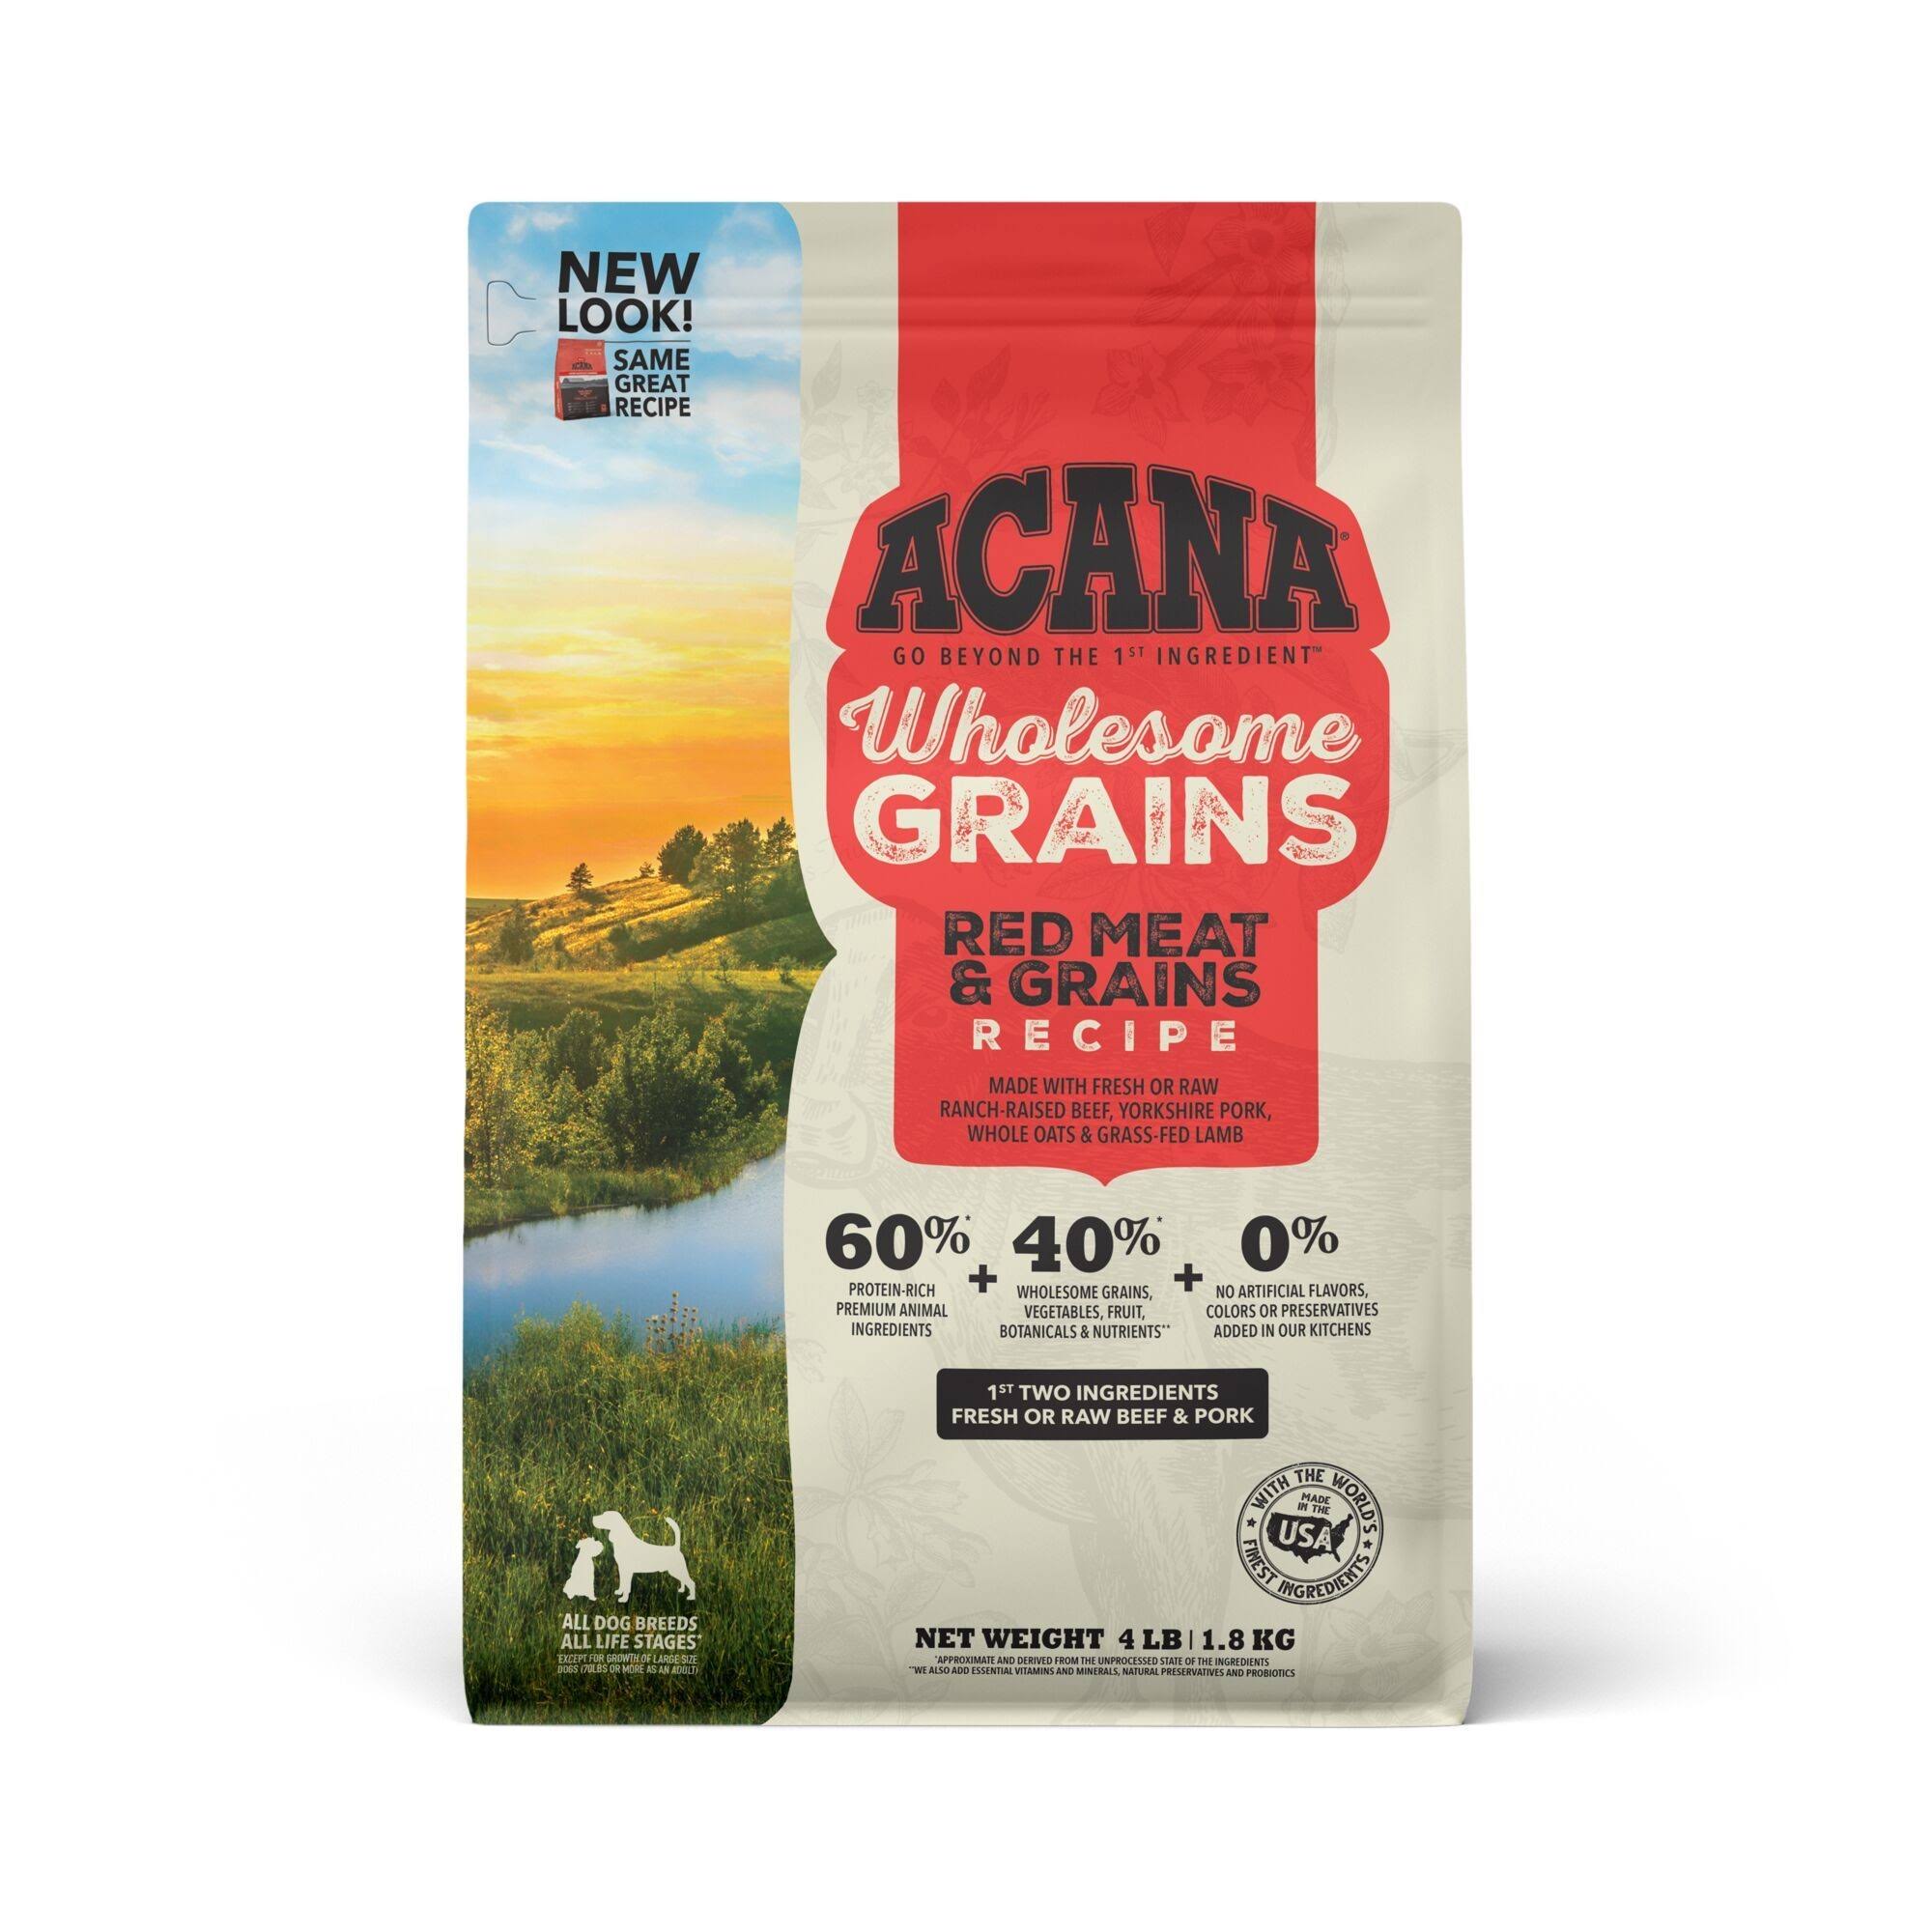 Acana Wholesome Grains Red Meat Recipe Dry Dog Food - 4lb